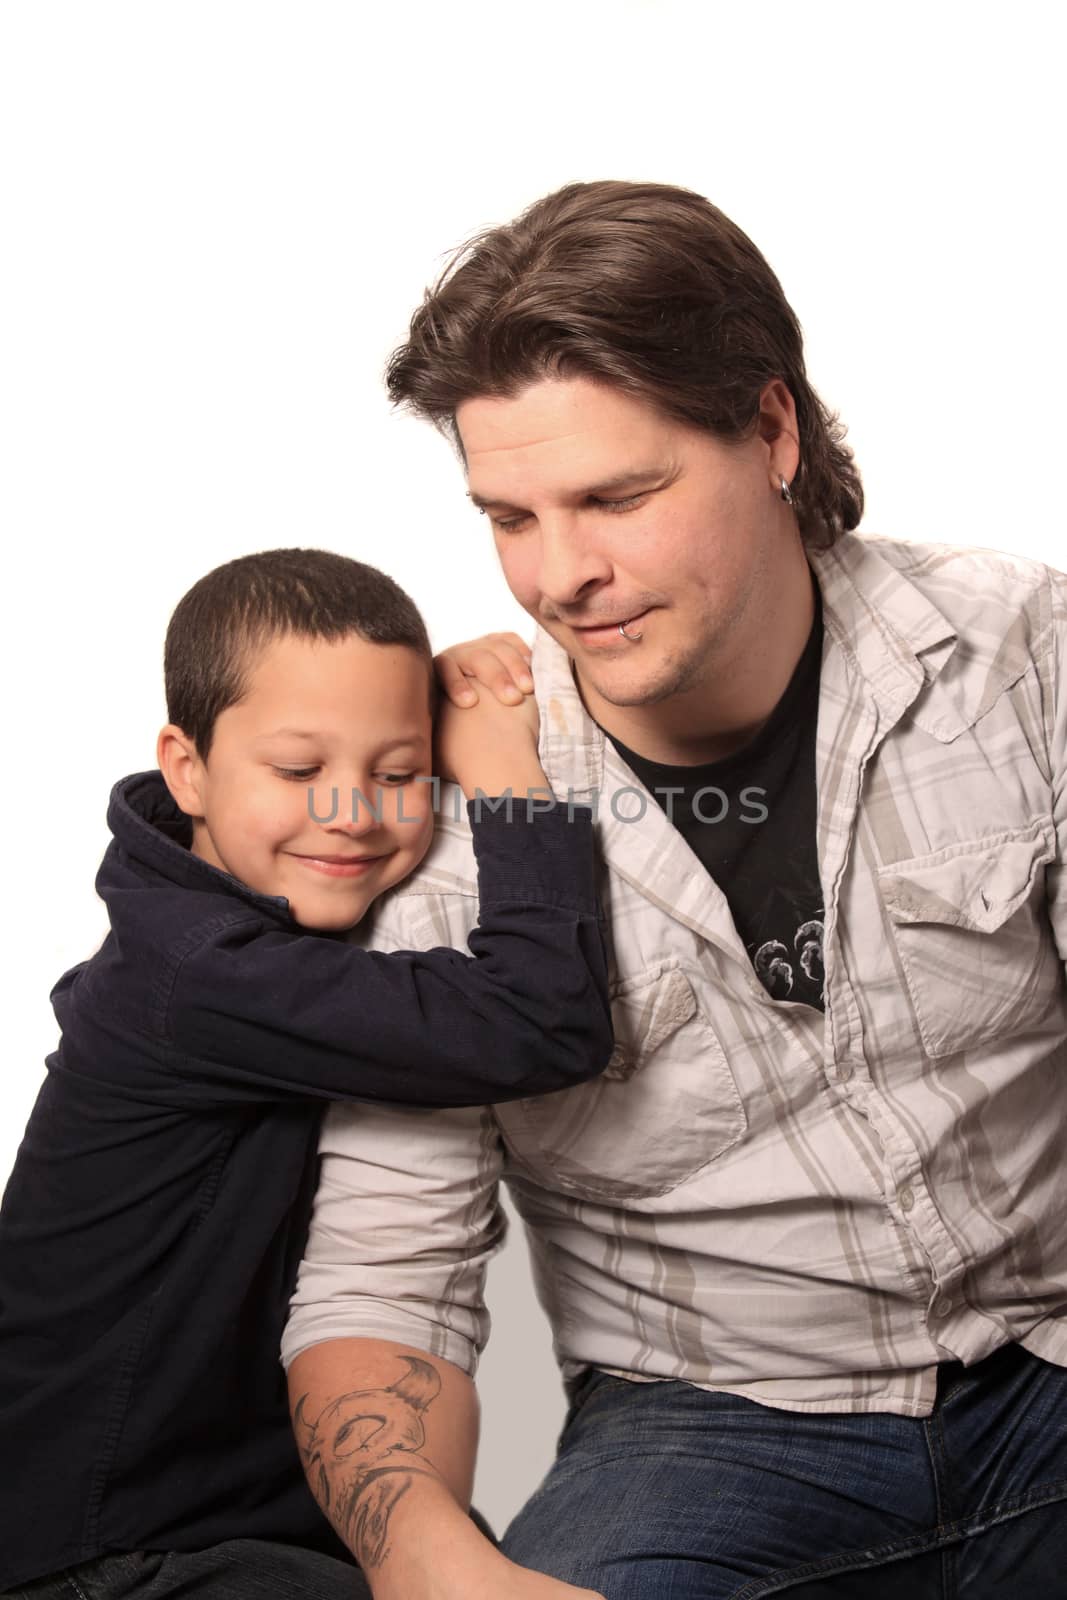 Handome father with tattoos and piercings and his son leaning on him 